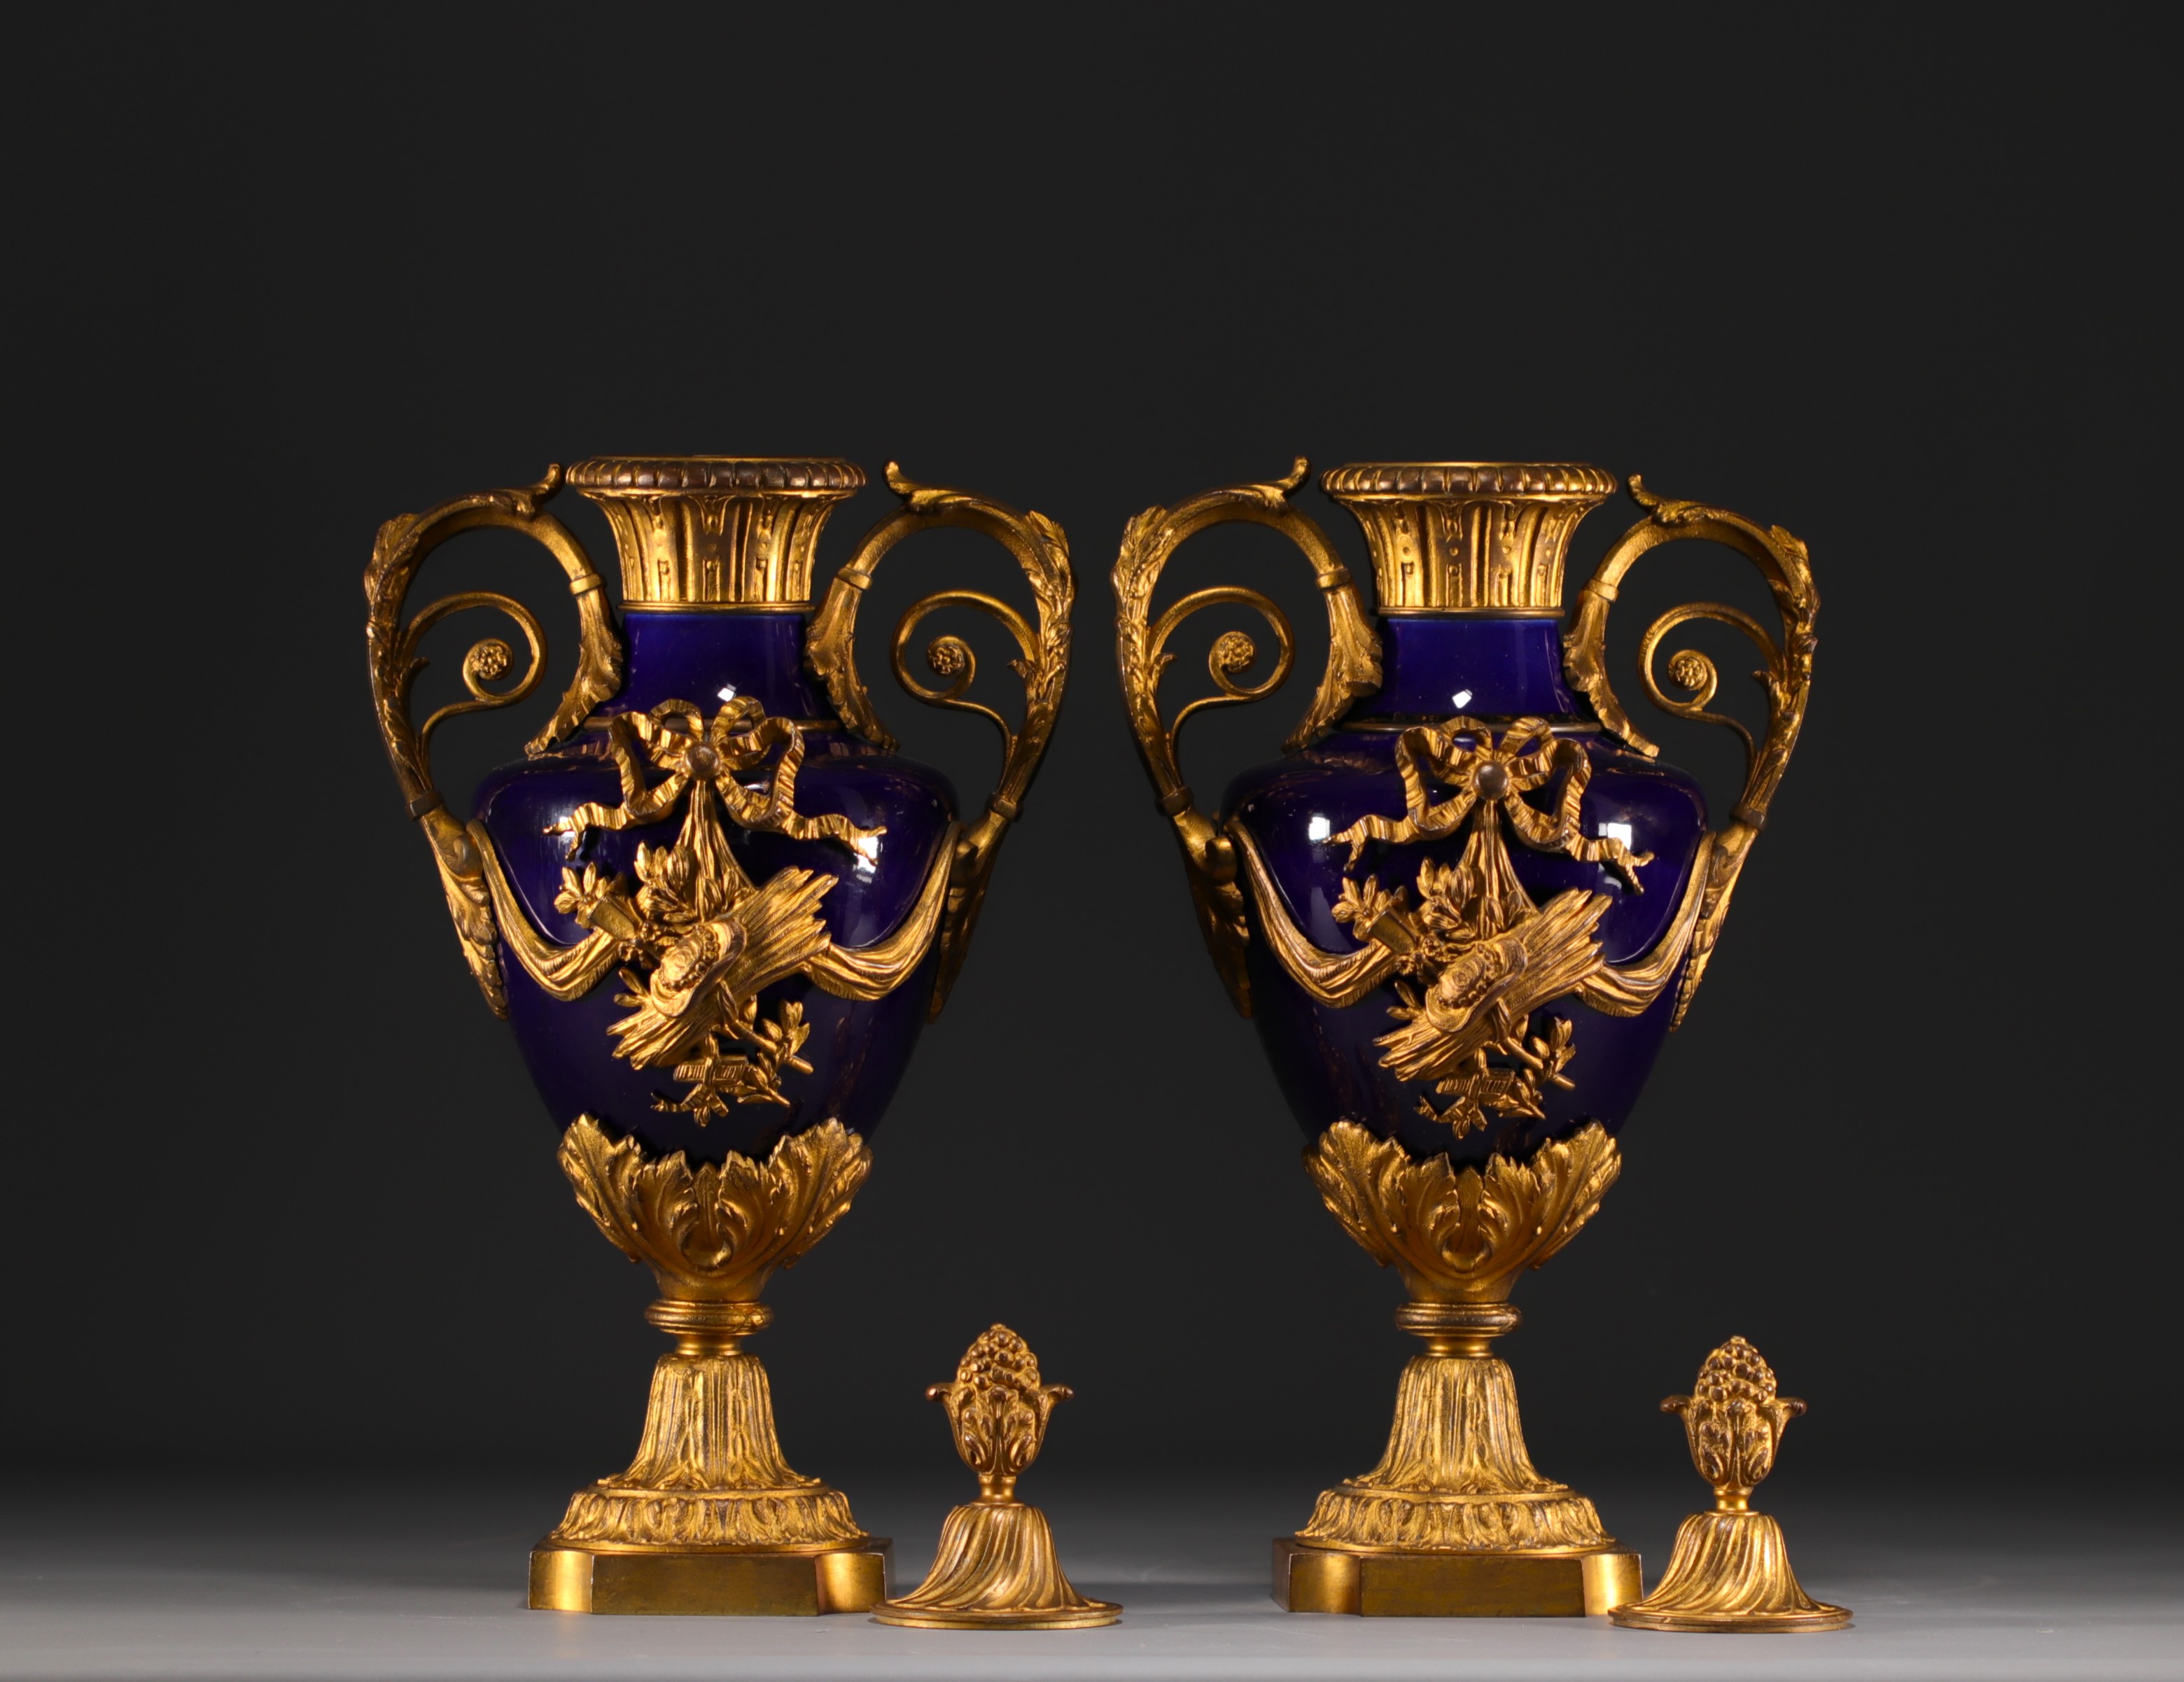 Pair of Louis XVI style covered vases in "bleu de Sevres" porcelain, gilded and chased bronzes. - Image 3 of 3